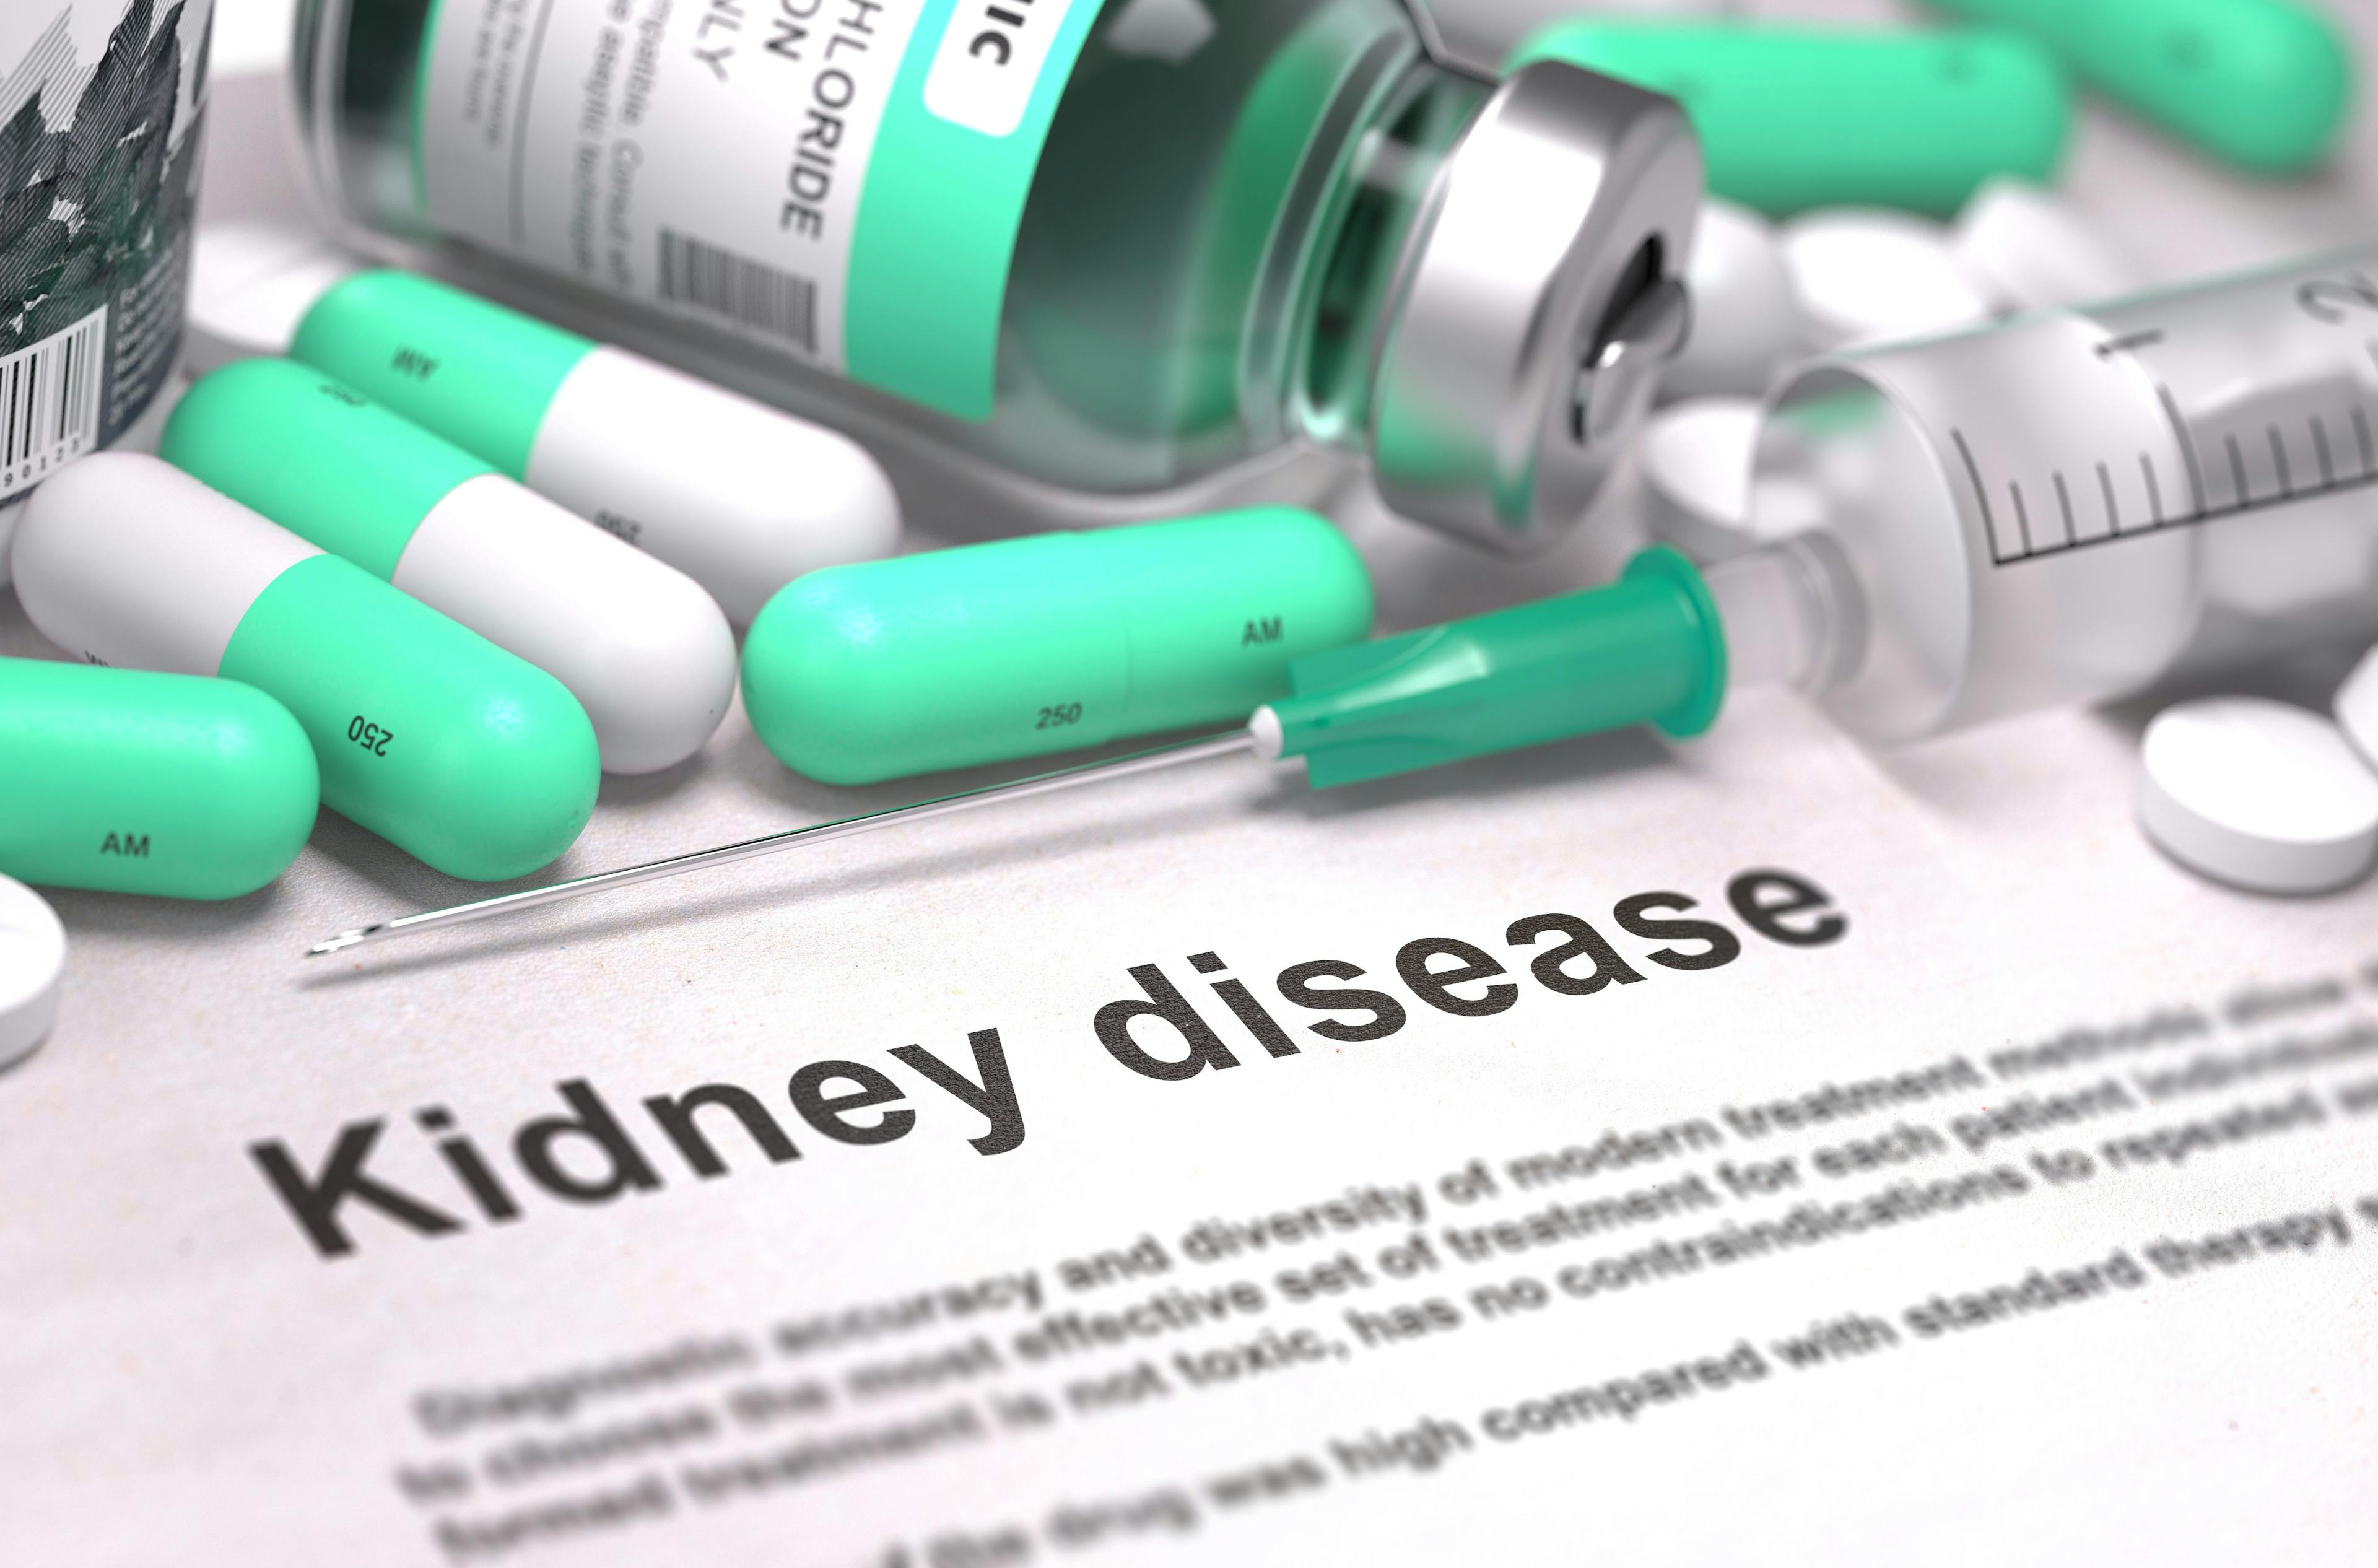 Kidney Disease stock imagery, including the words Kidney disease and medications. 